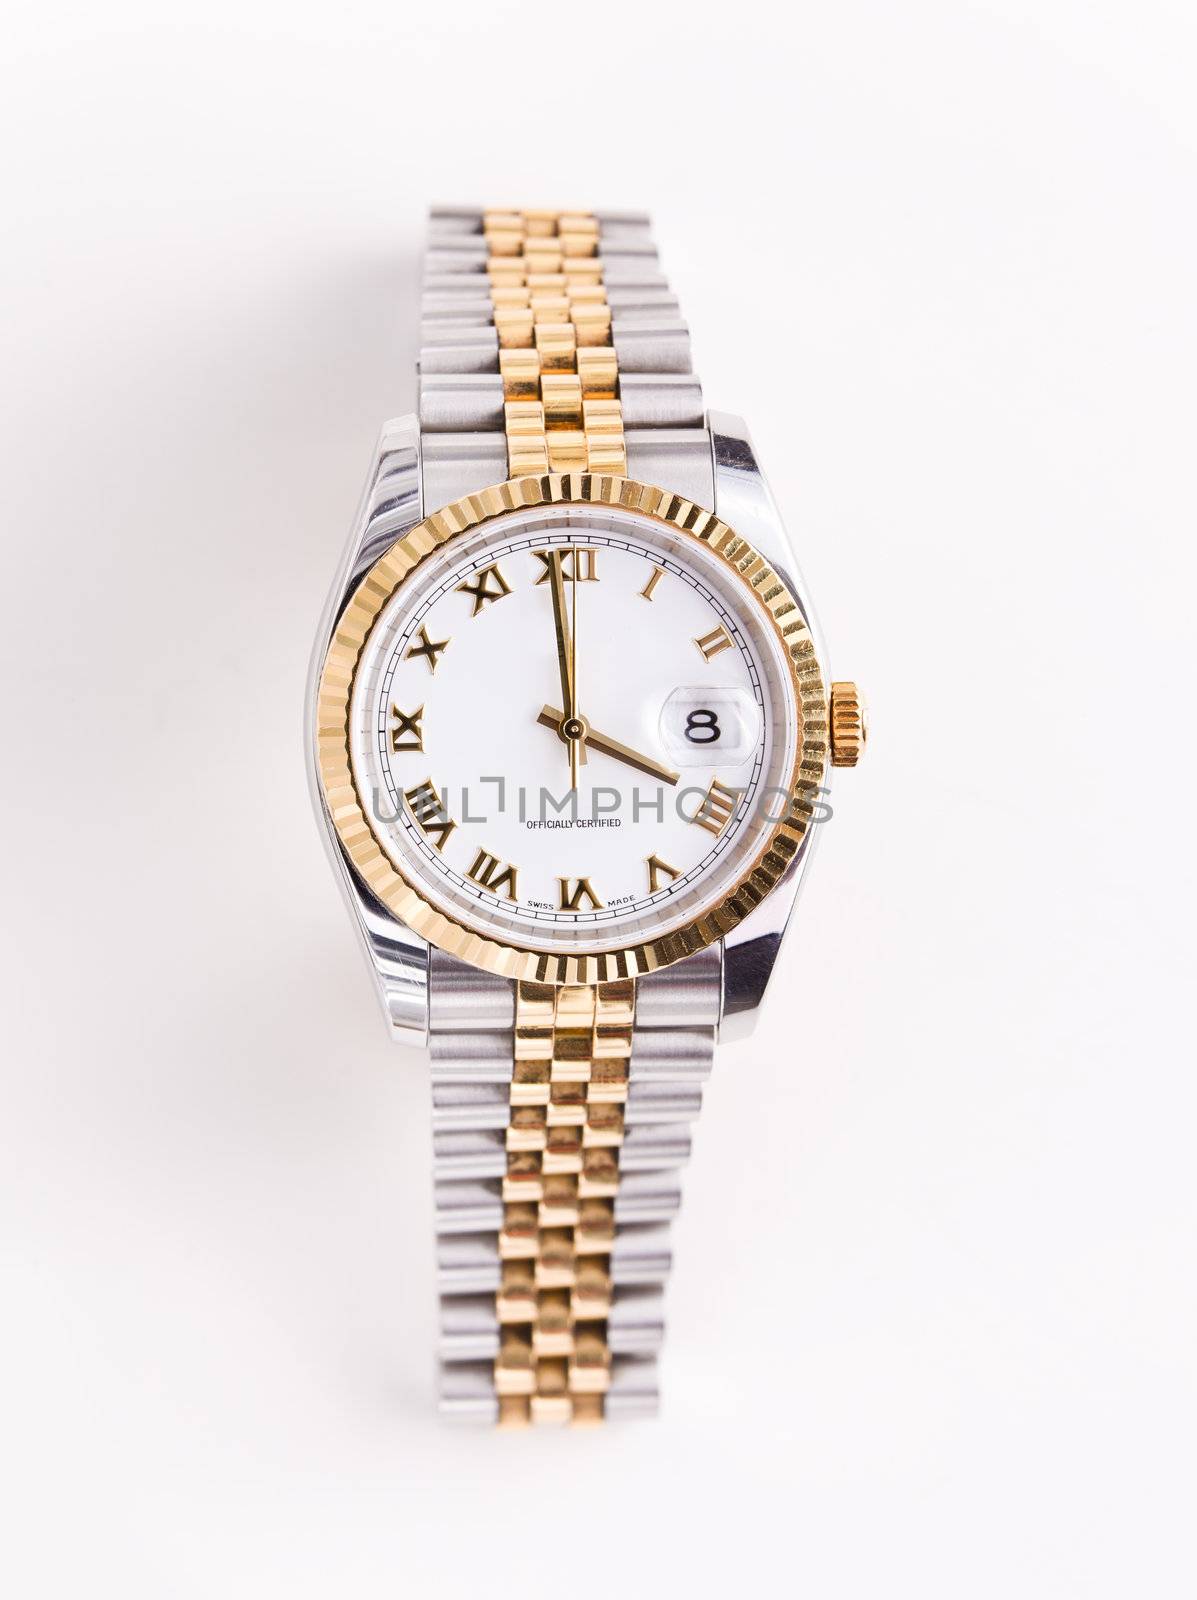 Gold and stainless steel mans watch by steheap